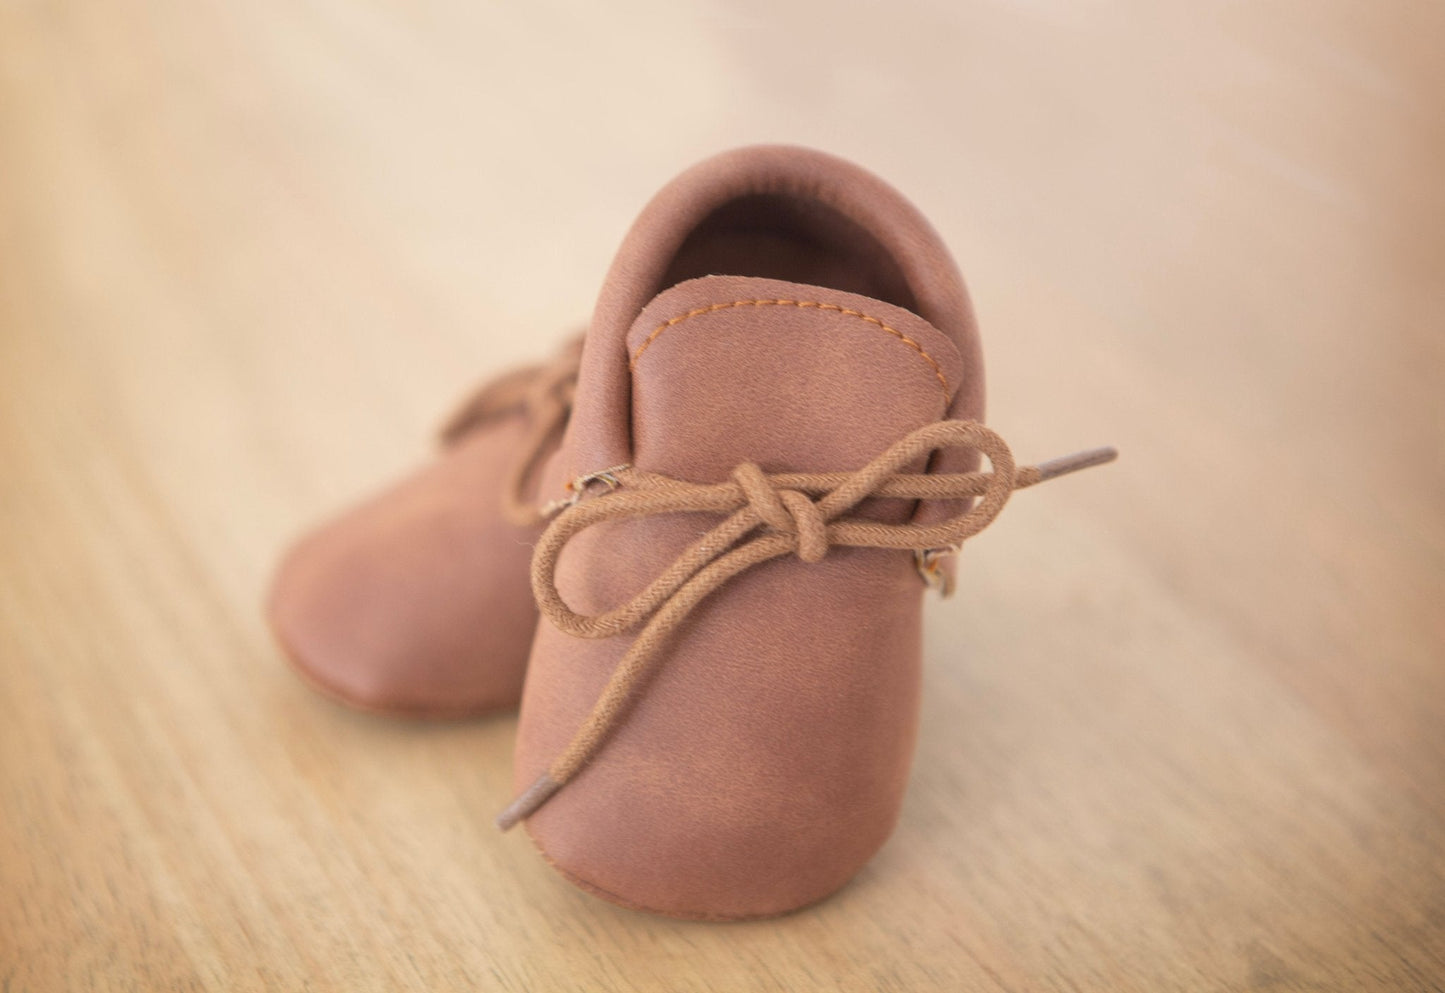 Load image into Gallery viewer, Baby Shoes Moccasins - Cheerful Lane
